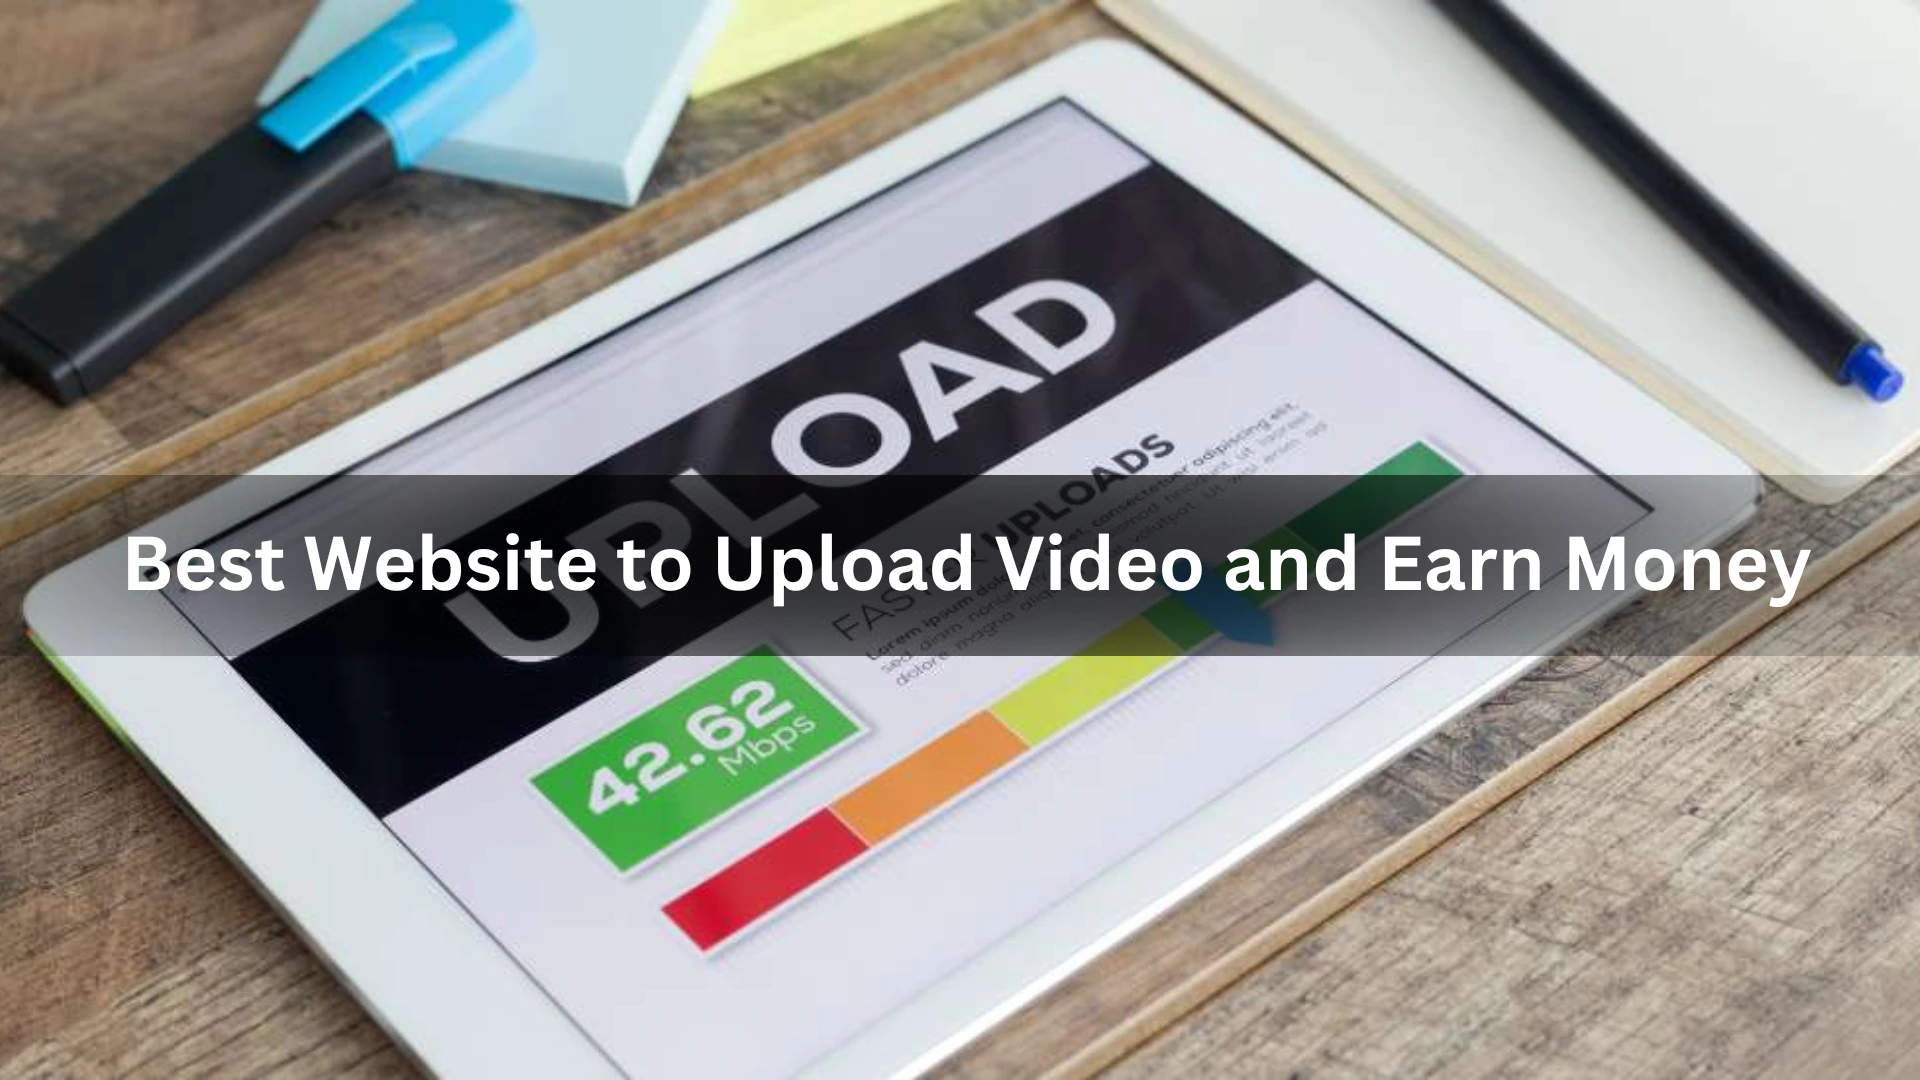 Best Website to Upload Video and Earn Money